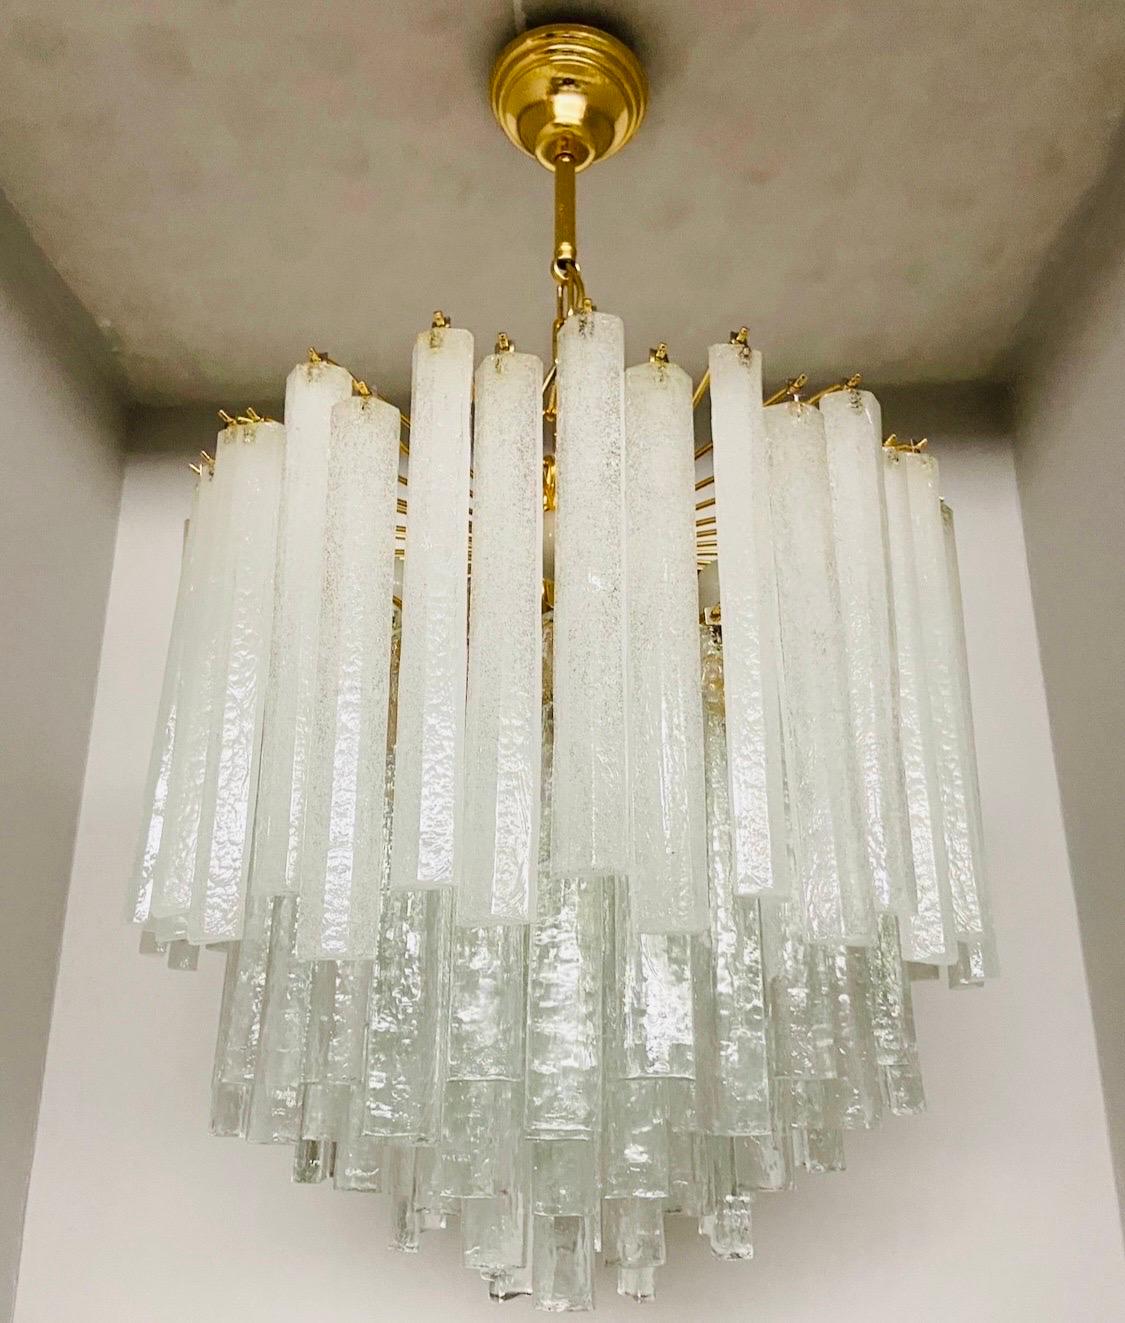 1970s Mid-Century Modern White Murano Glass Cascade Chandelier by Mazzega For Sale 1